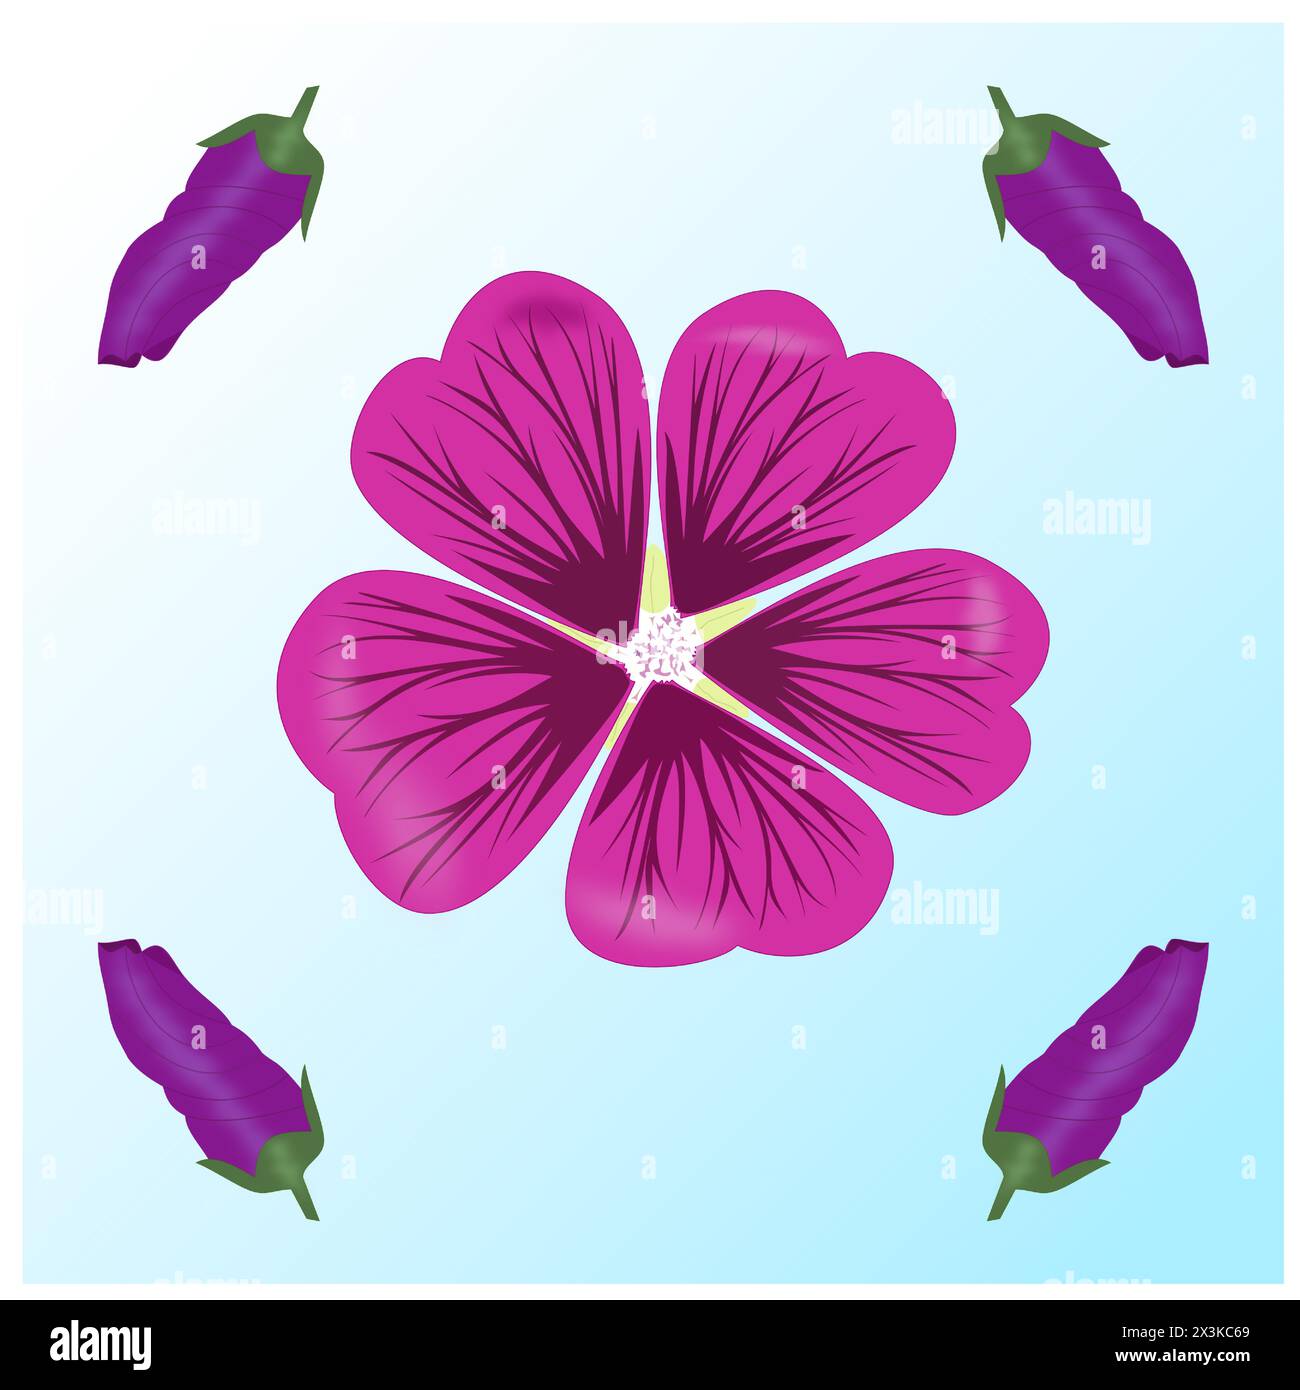 Moorish mallow flower in bloom in the middle and around it four still undeveloped mallow flowers on a blue background Stock Vector